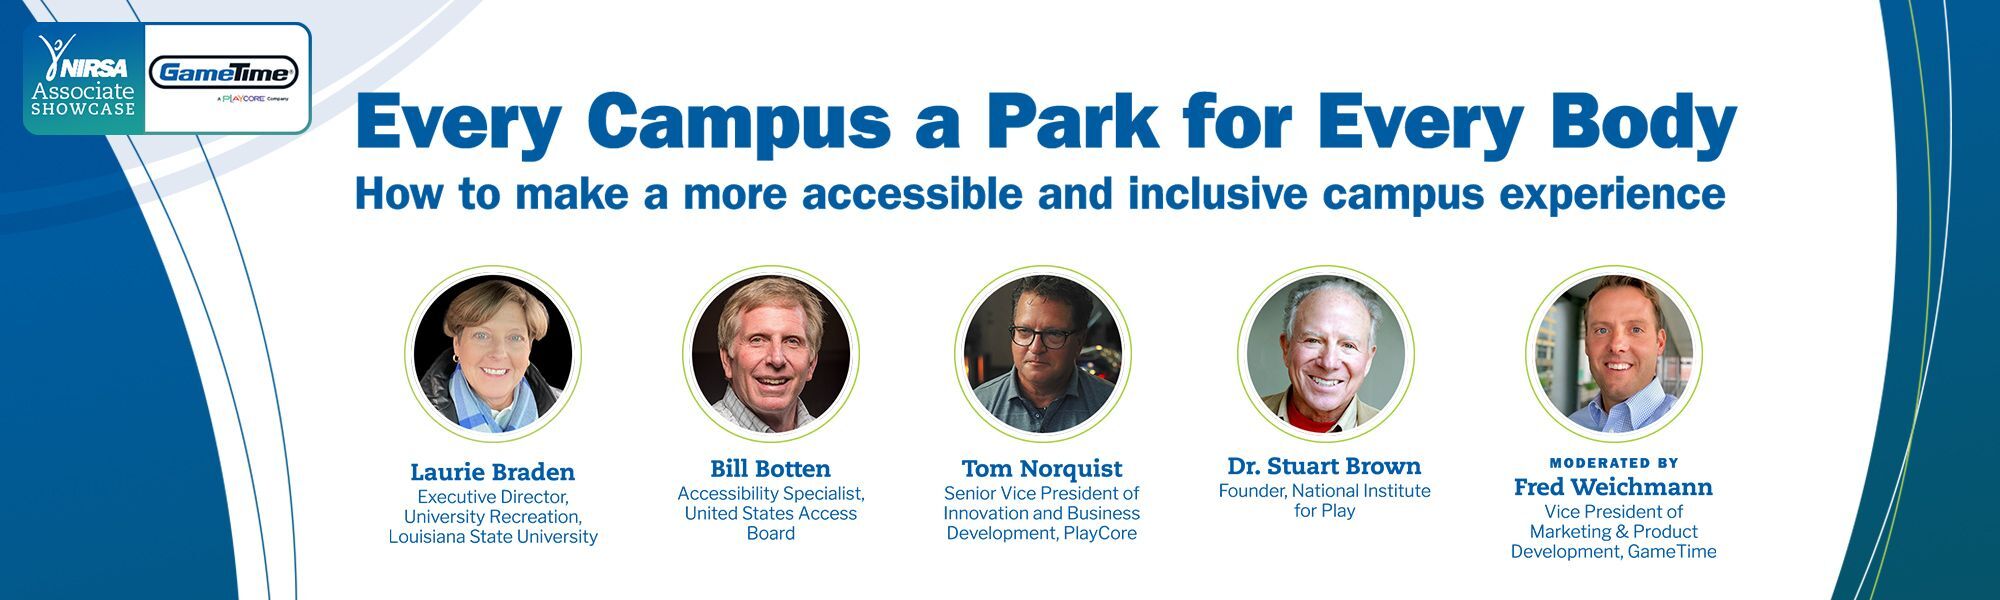 Every Campus a Park for Every Body: How to make a more accessible and inclusive campus experience